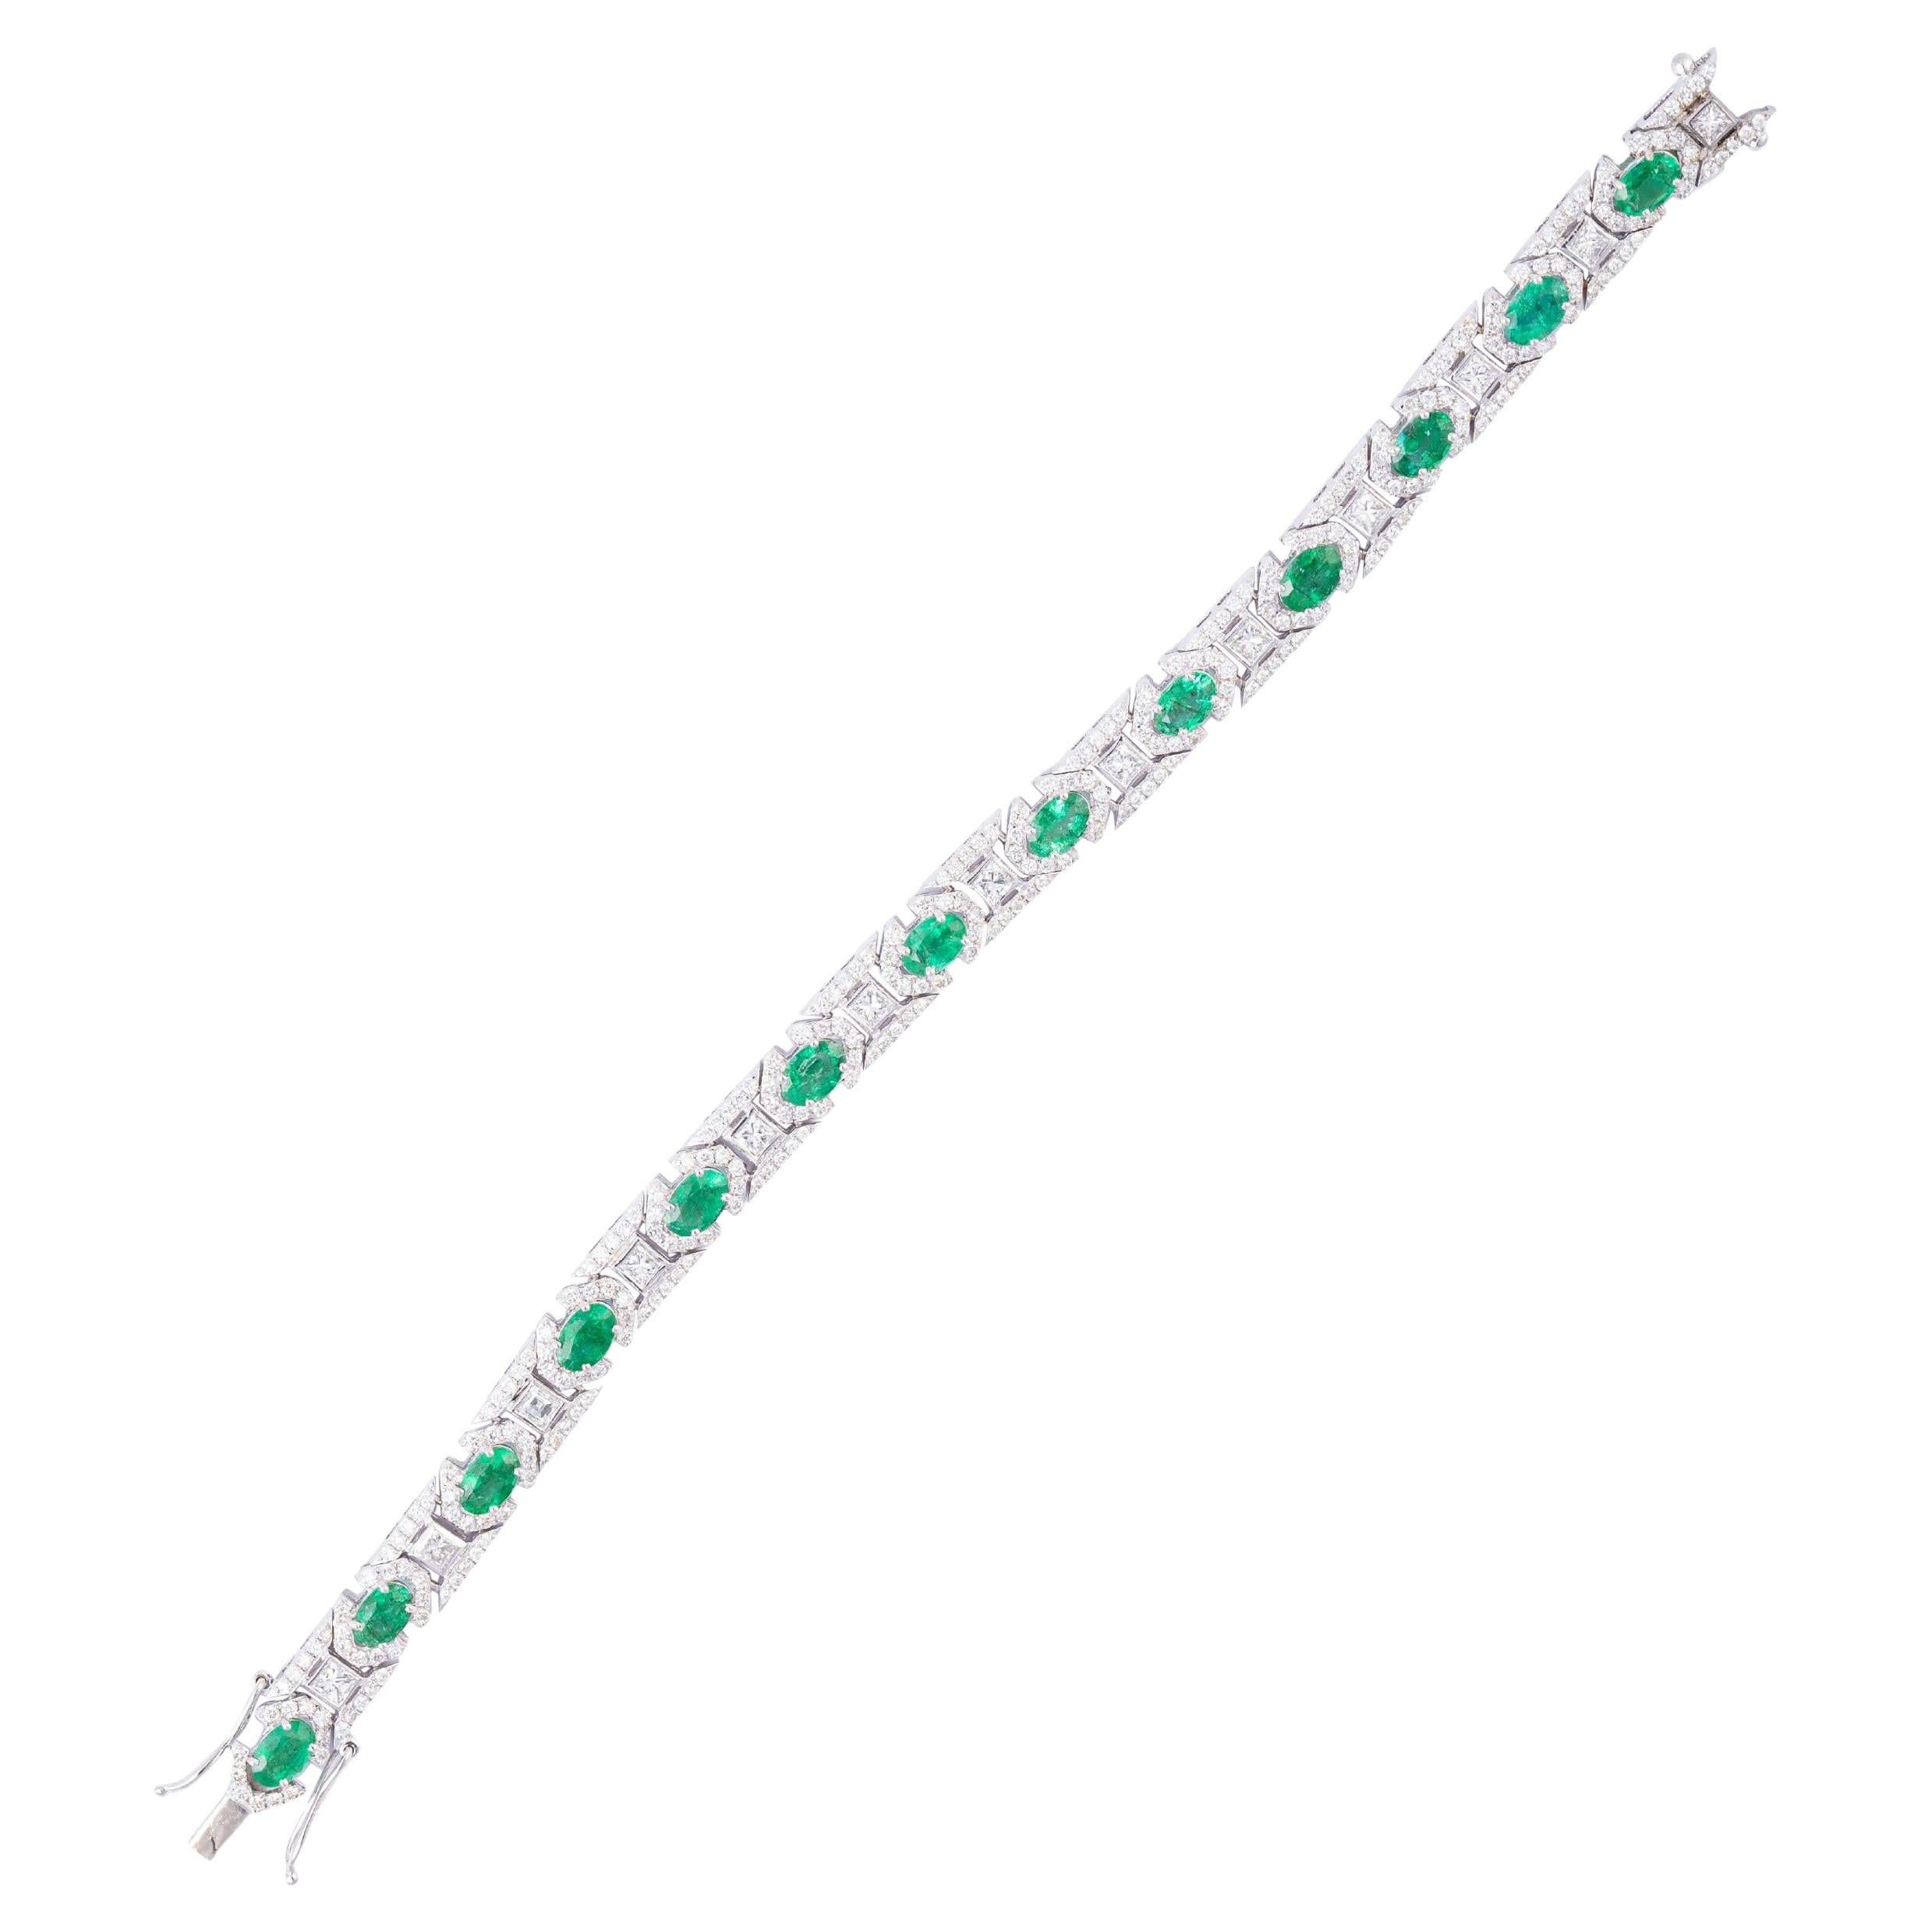 Natural Zambian Emerald Tennis Bracelet with Diamonds and 18k Gold For Sale